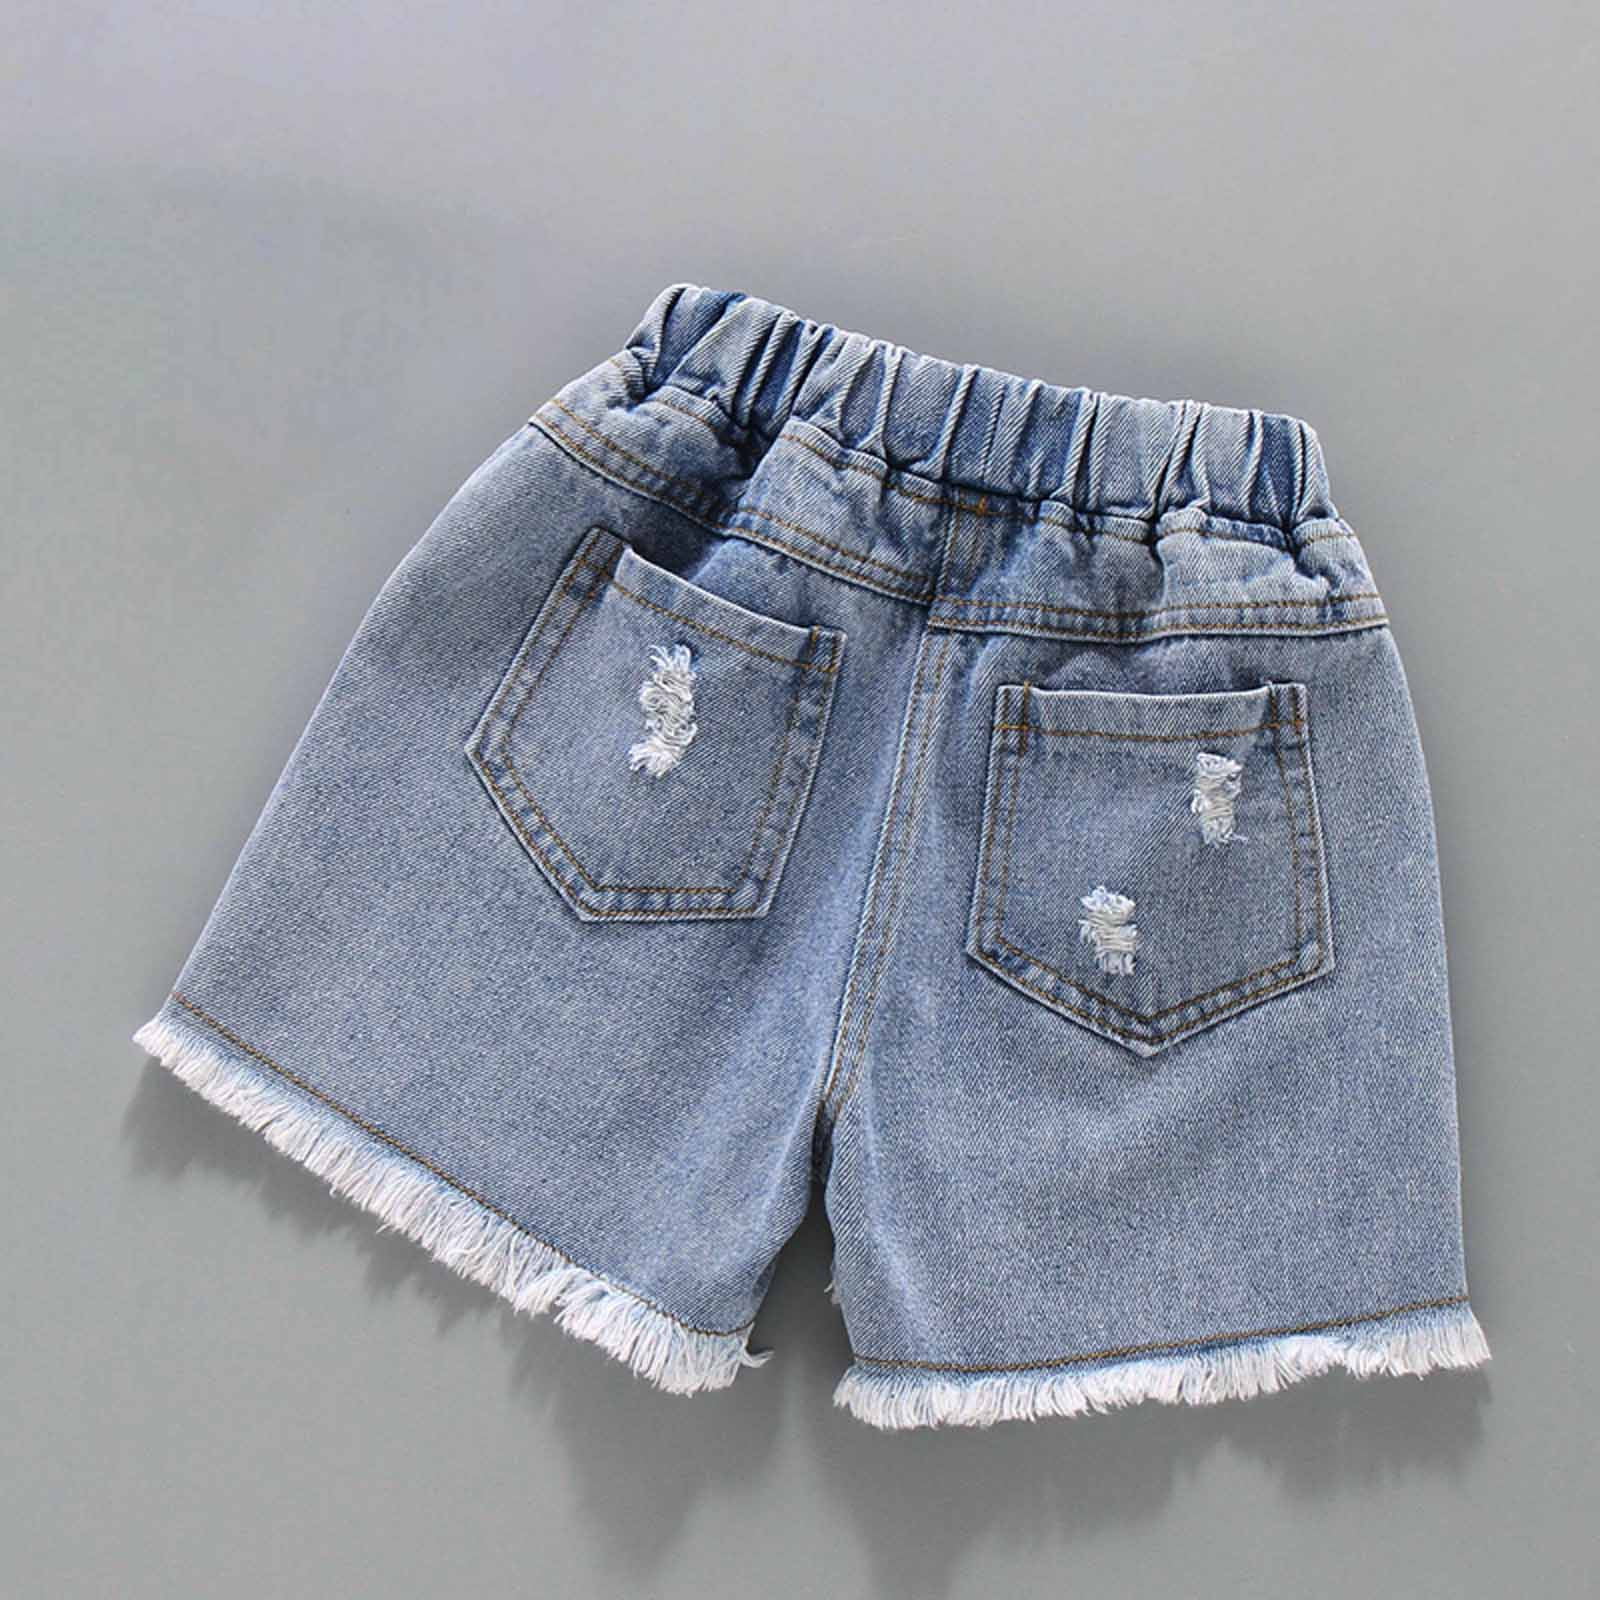 ZCFZJW Toddler Baby Girls Casual Denim Shorts Middle School Students Summer  High Waisted Thin Elastic Waistband Jeans Short Pants #02-Blue 14-15 Years